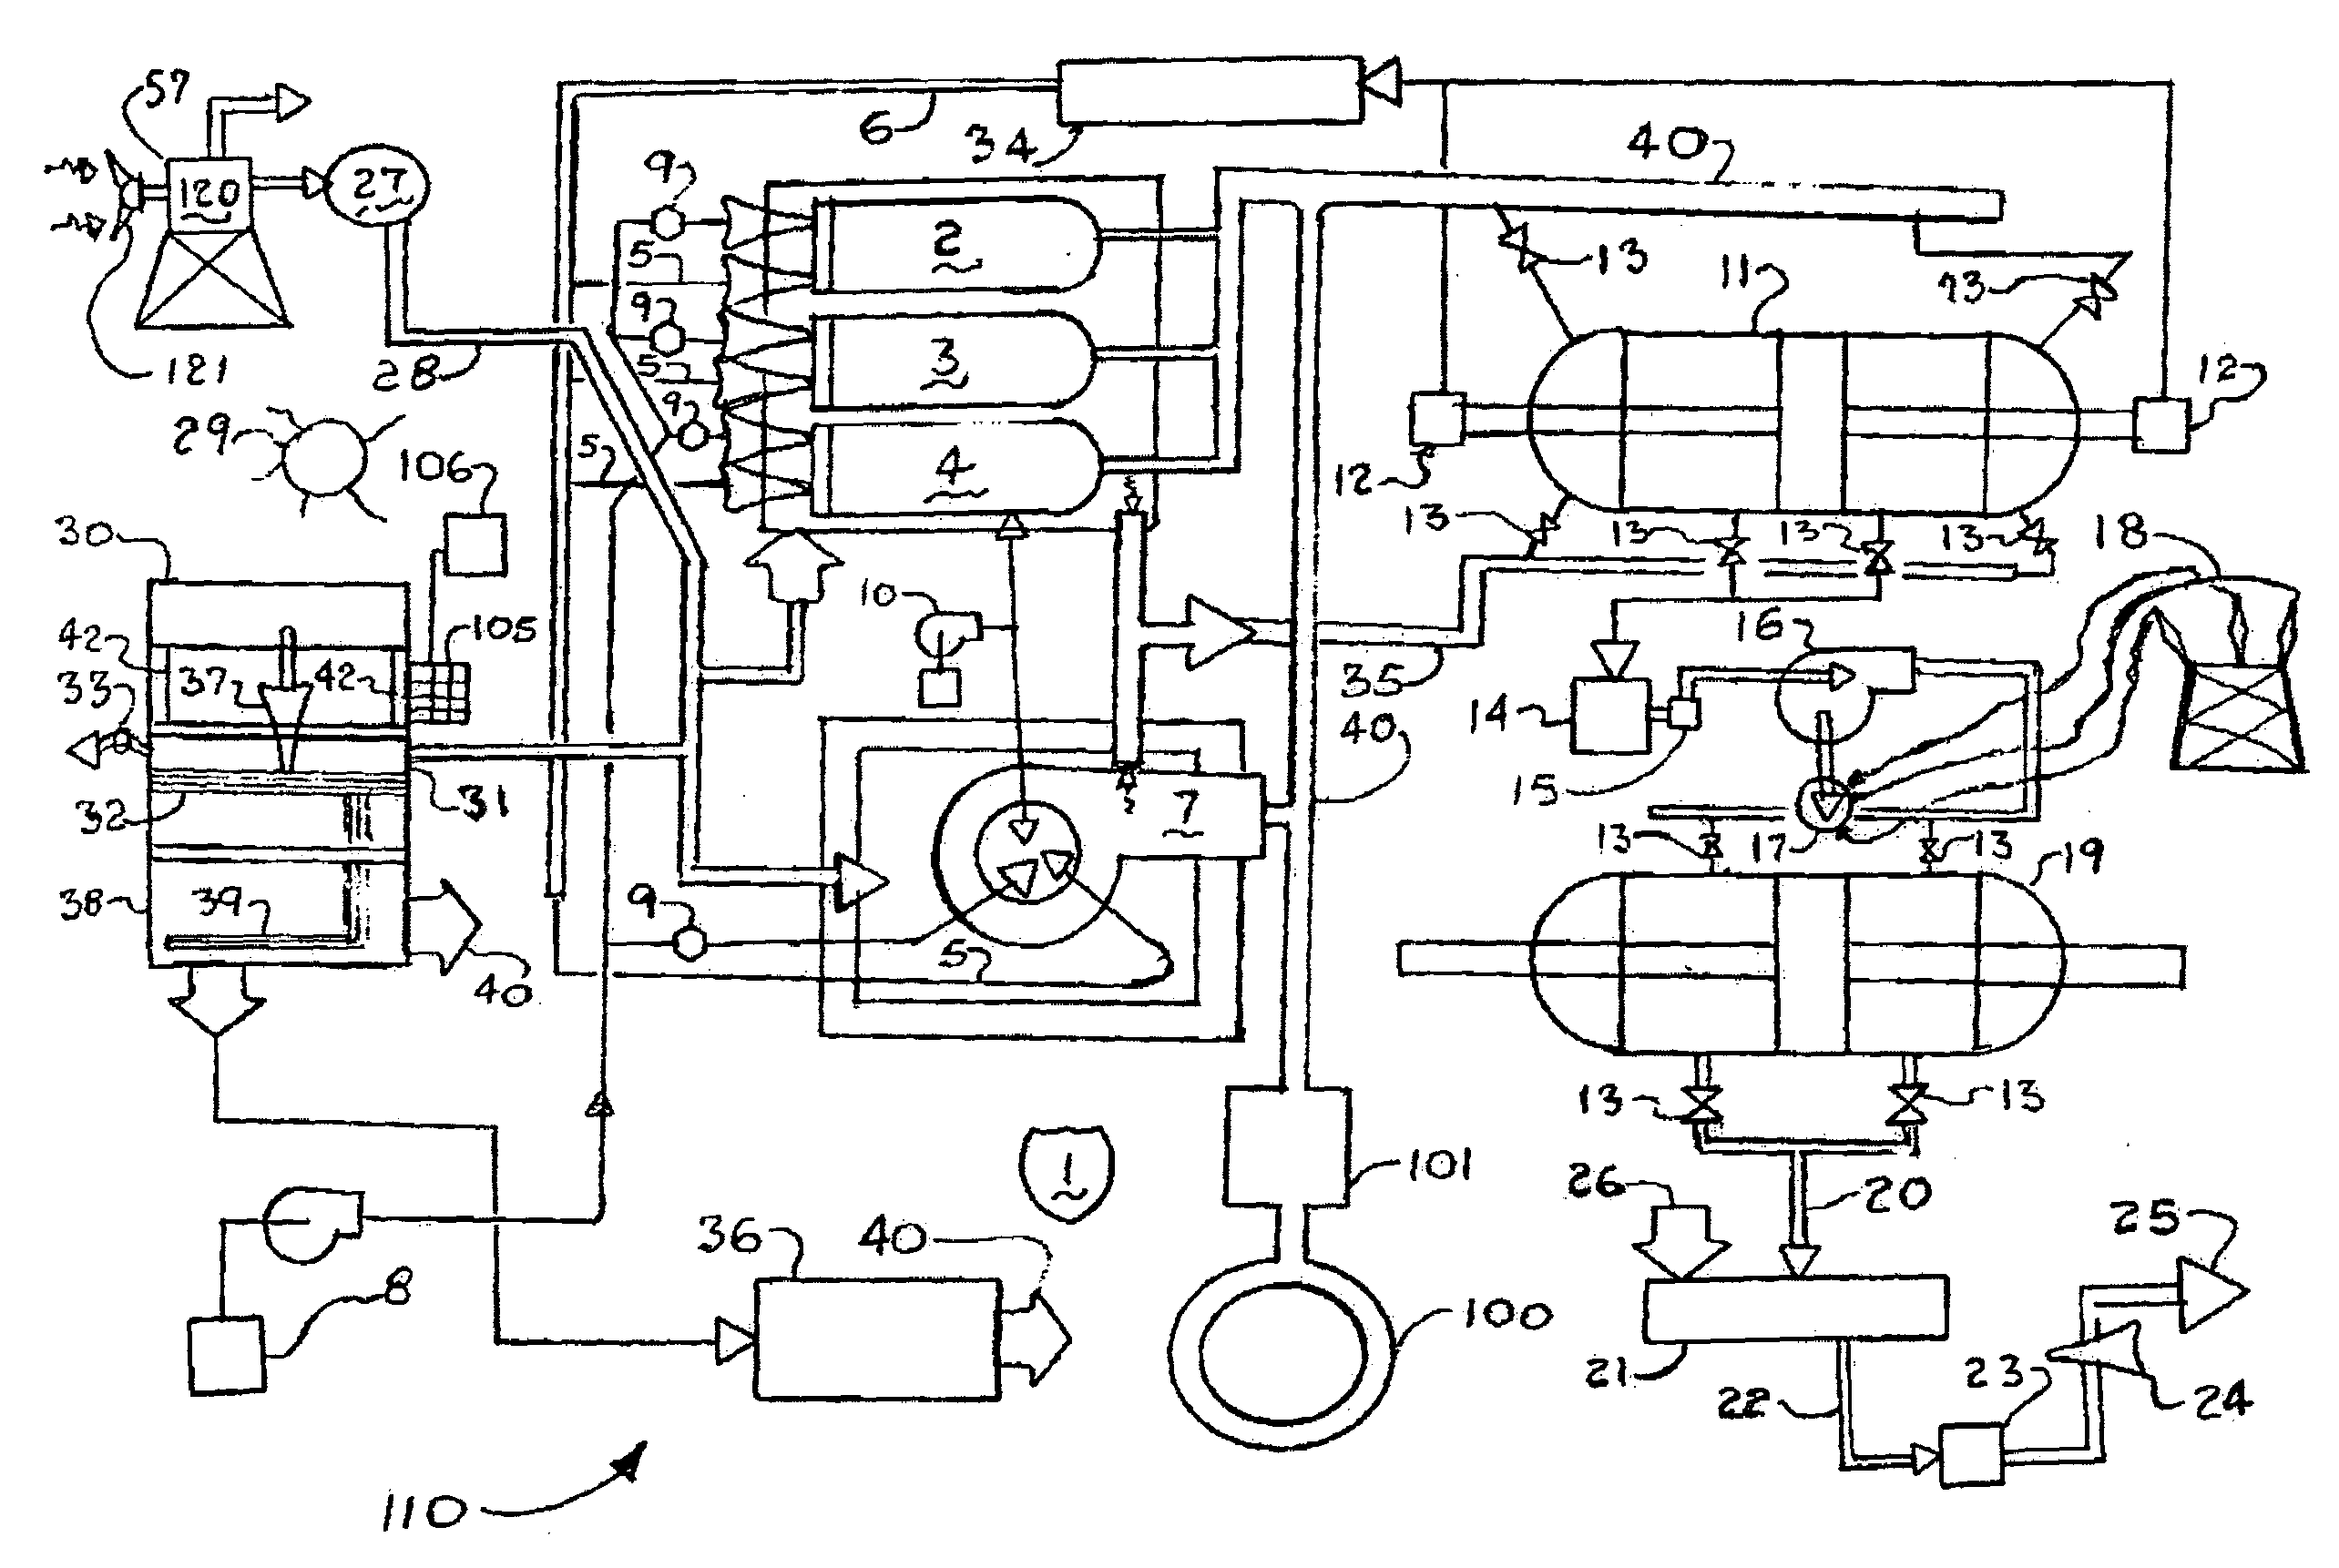 Power generating systems and methods